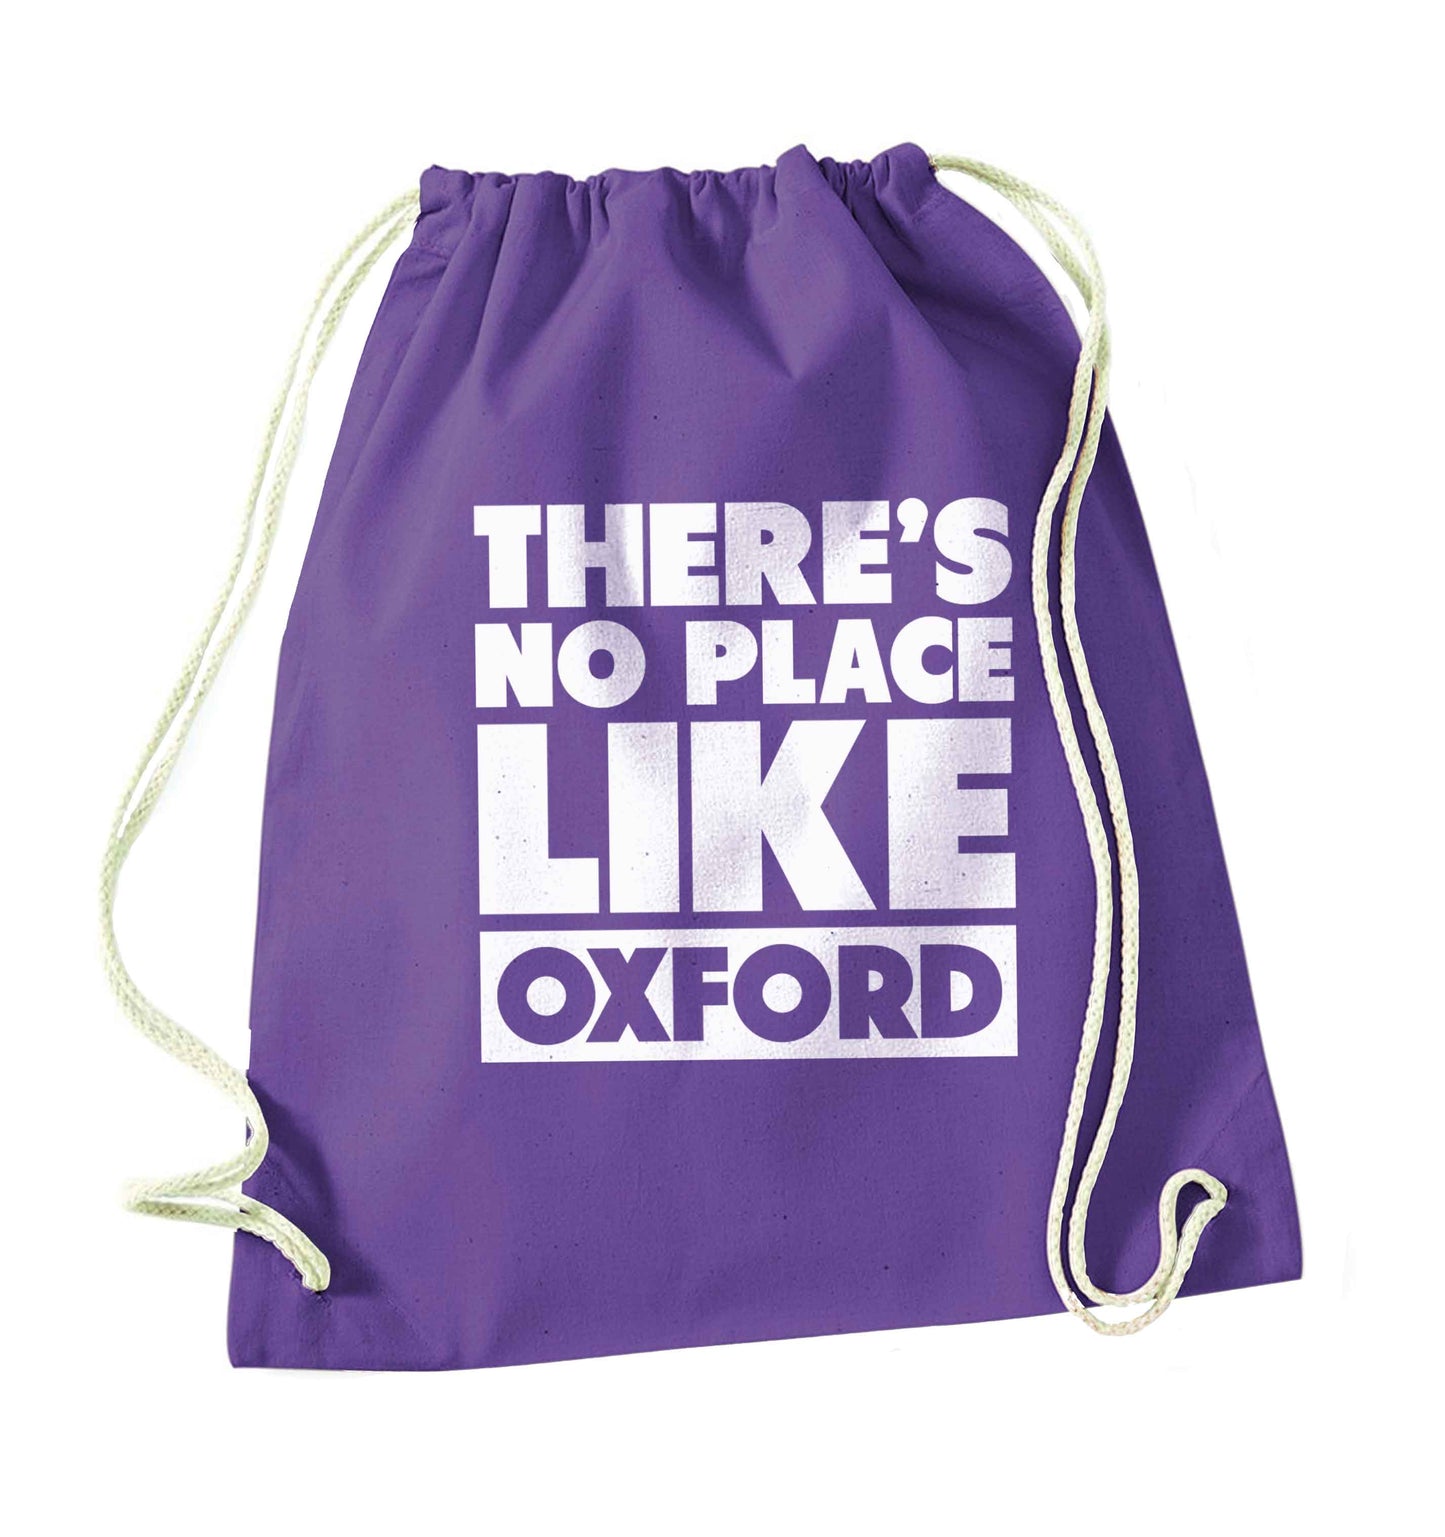 There's no place like Oxford purple drawstring bag